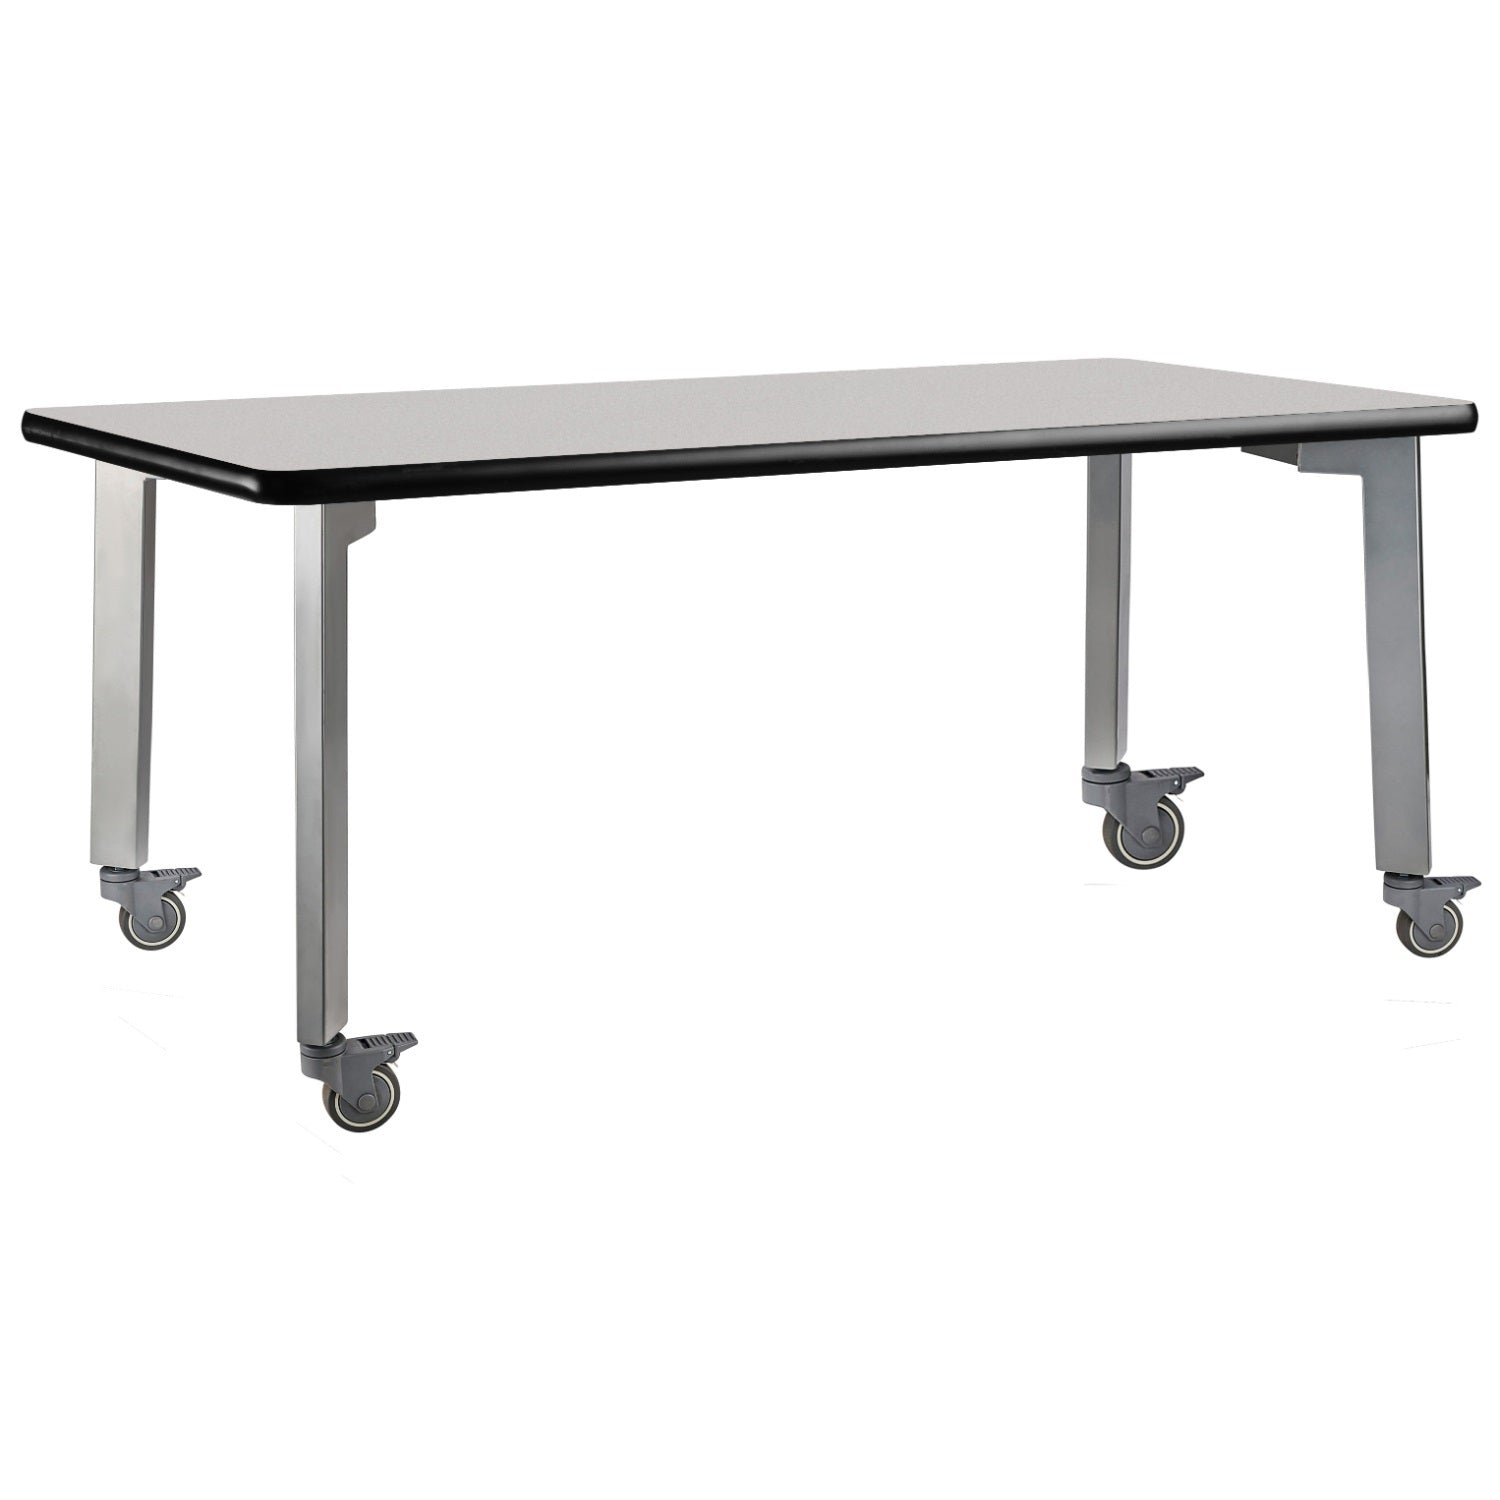 Titan Mobile Table, 36" x 72", Supreme High Pressure Laminate Top with MDF Core and ProtectEdge